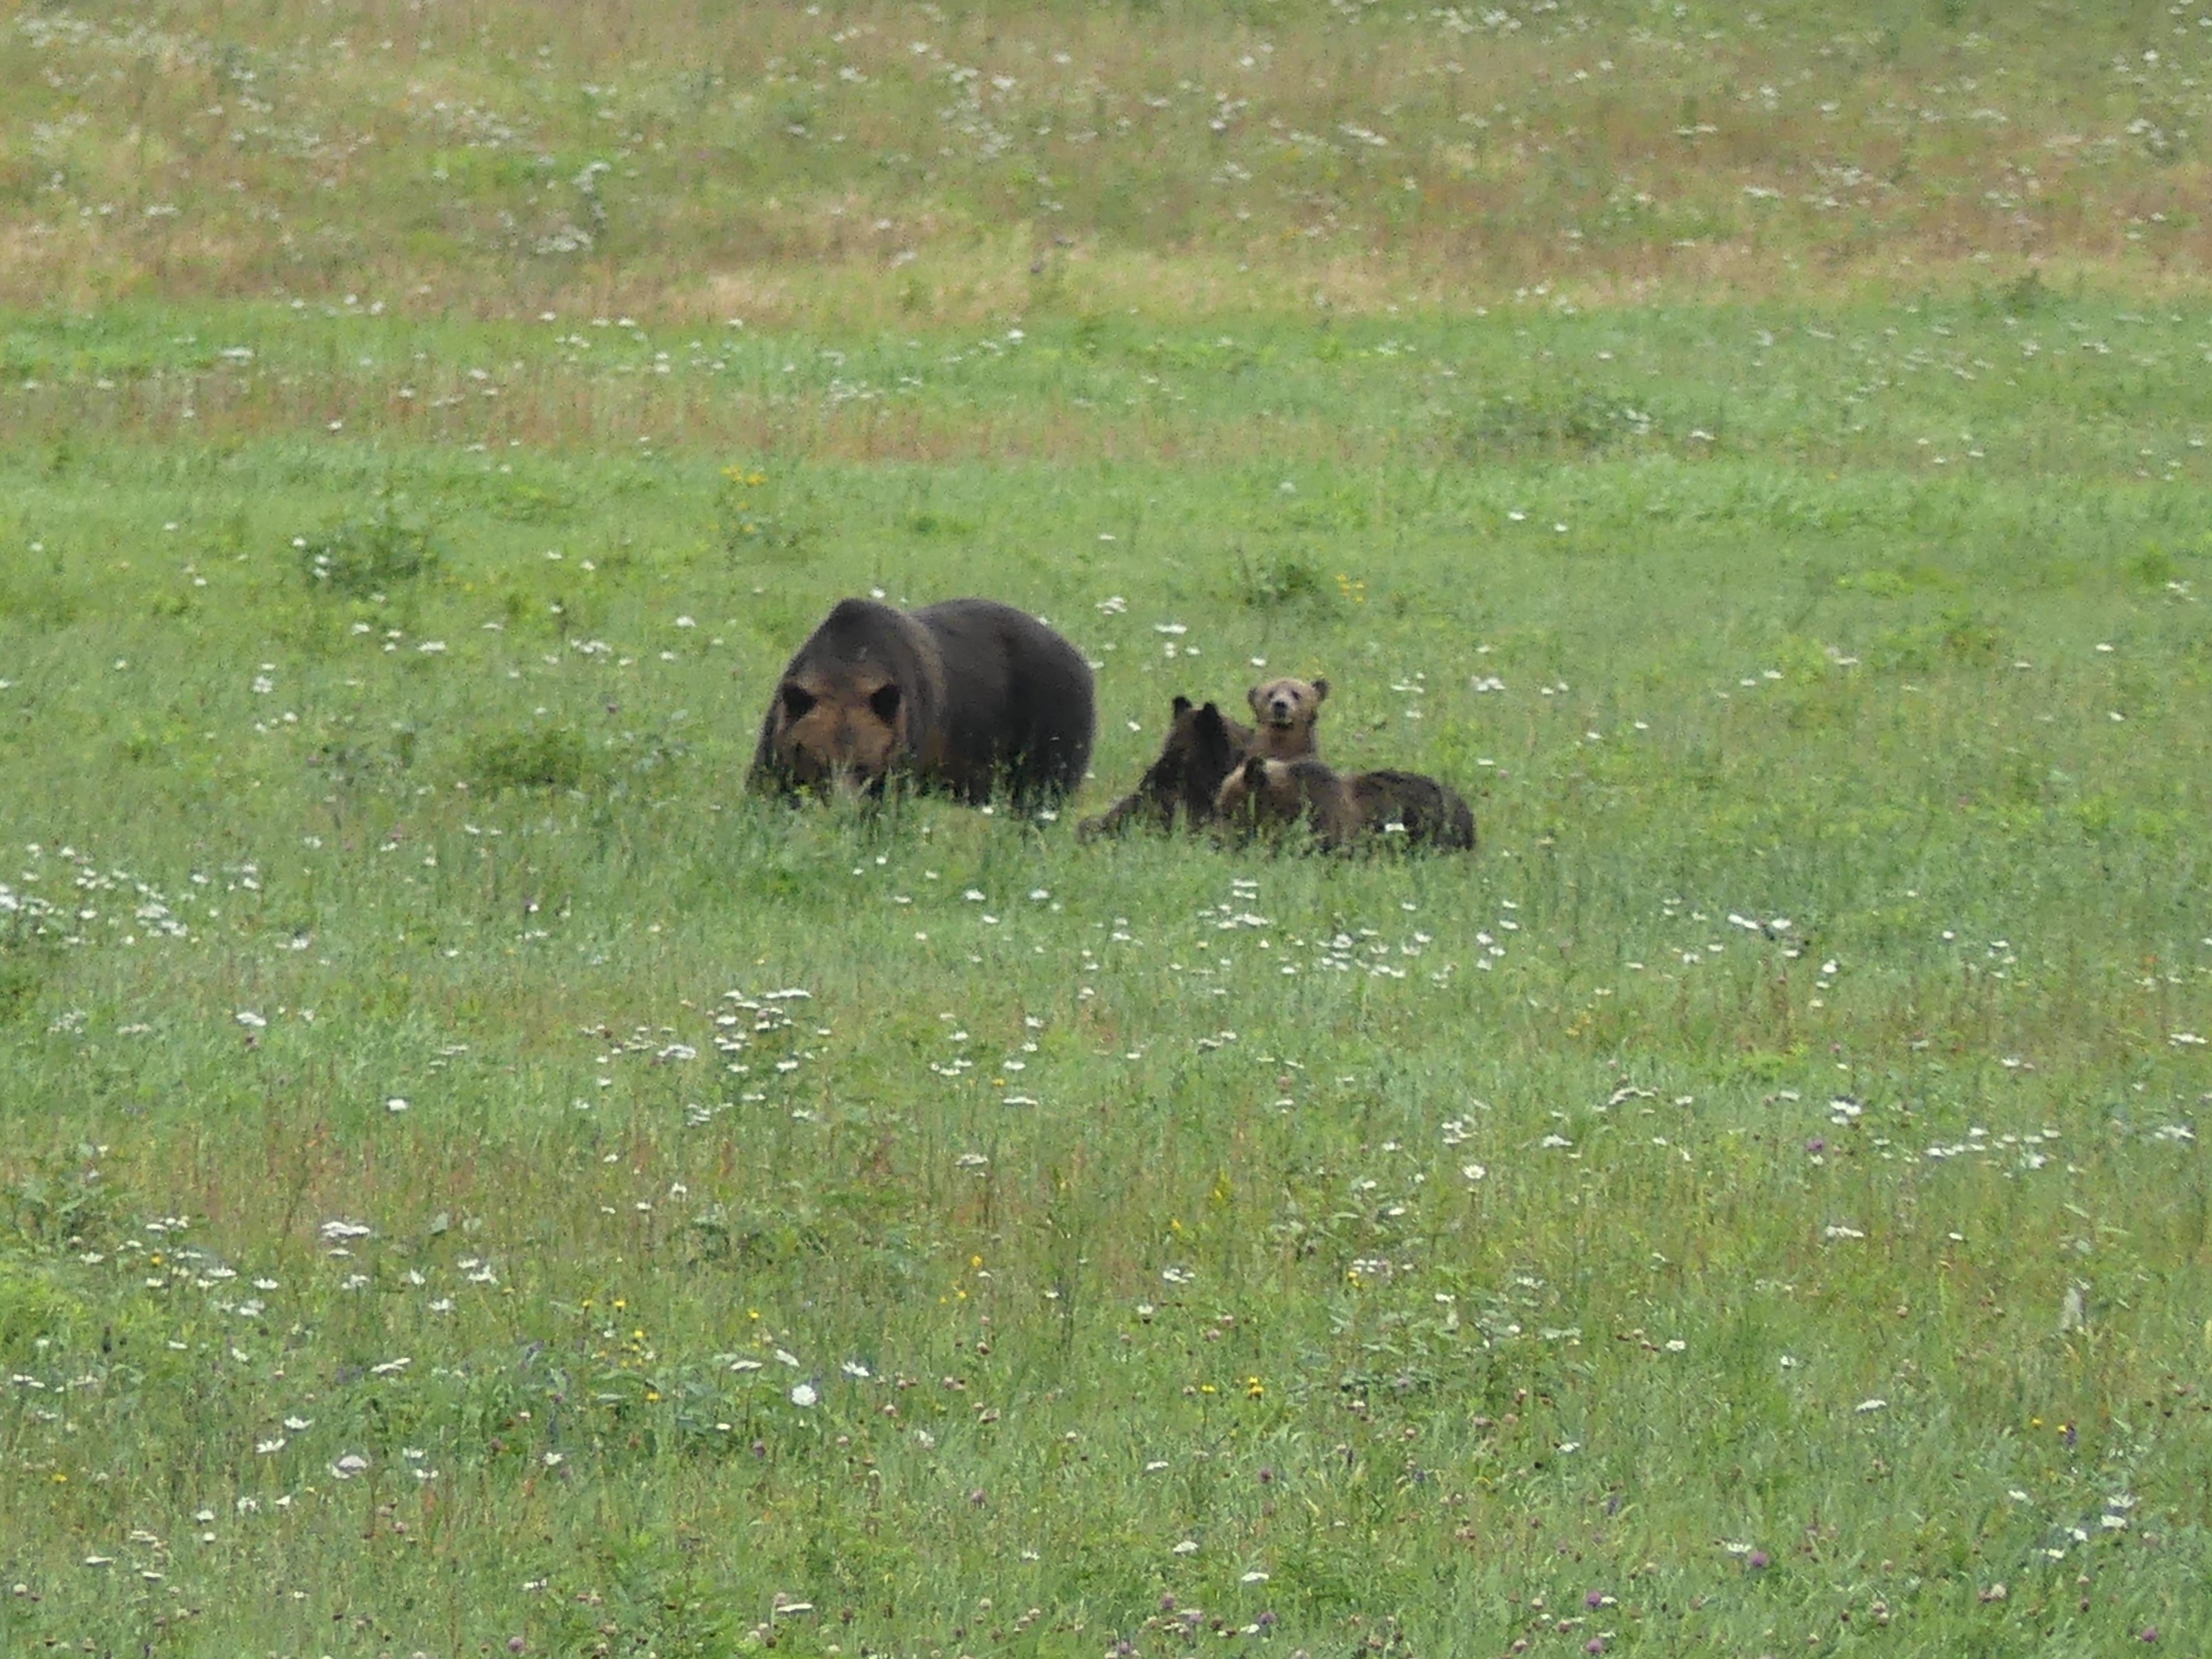 Grizzly bear with her three cubs on a grassy meadow